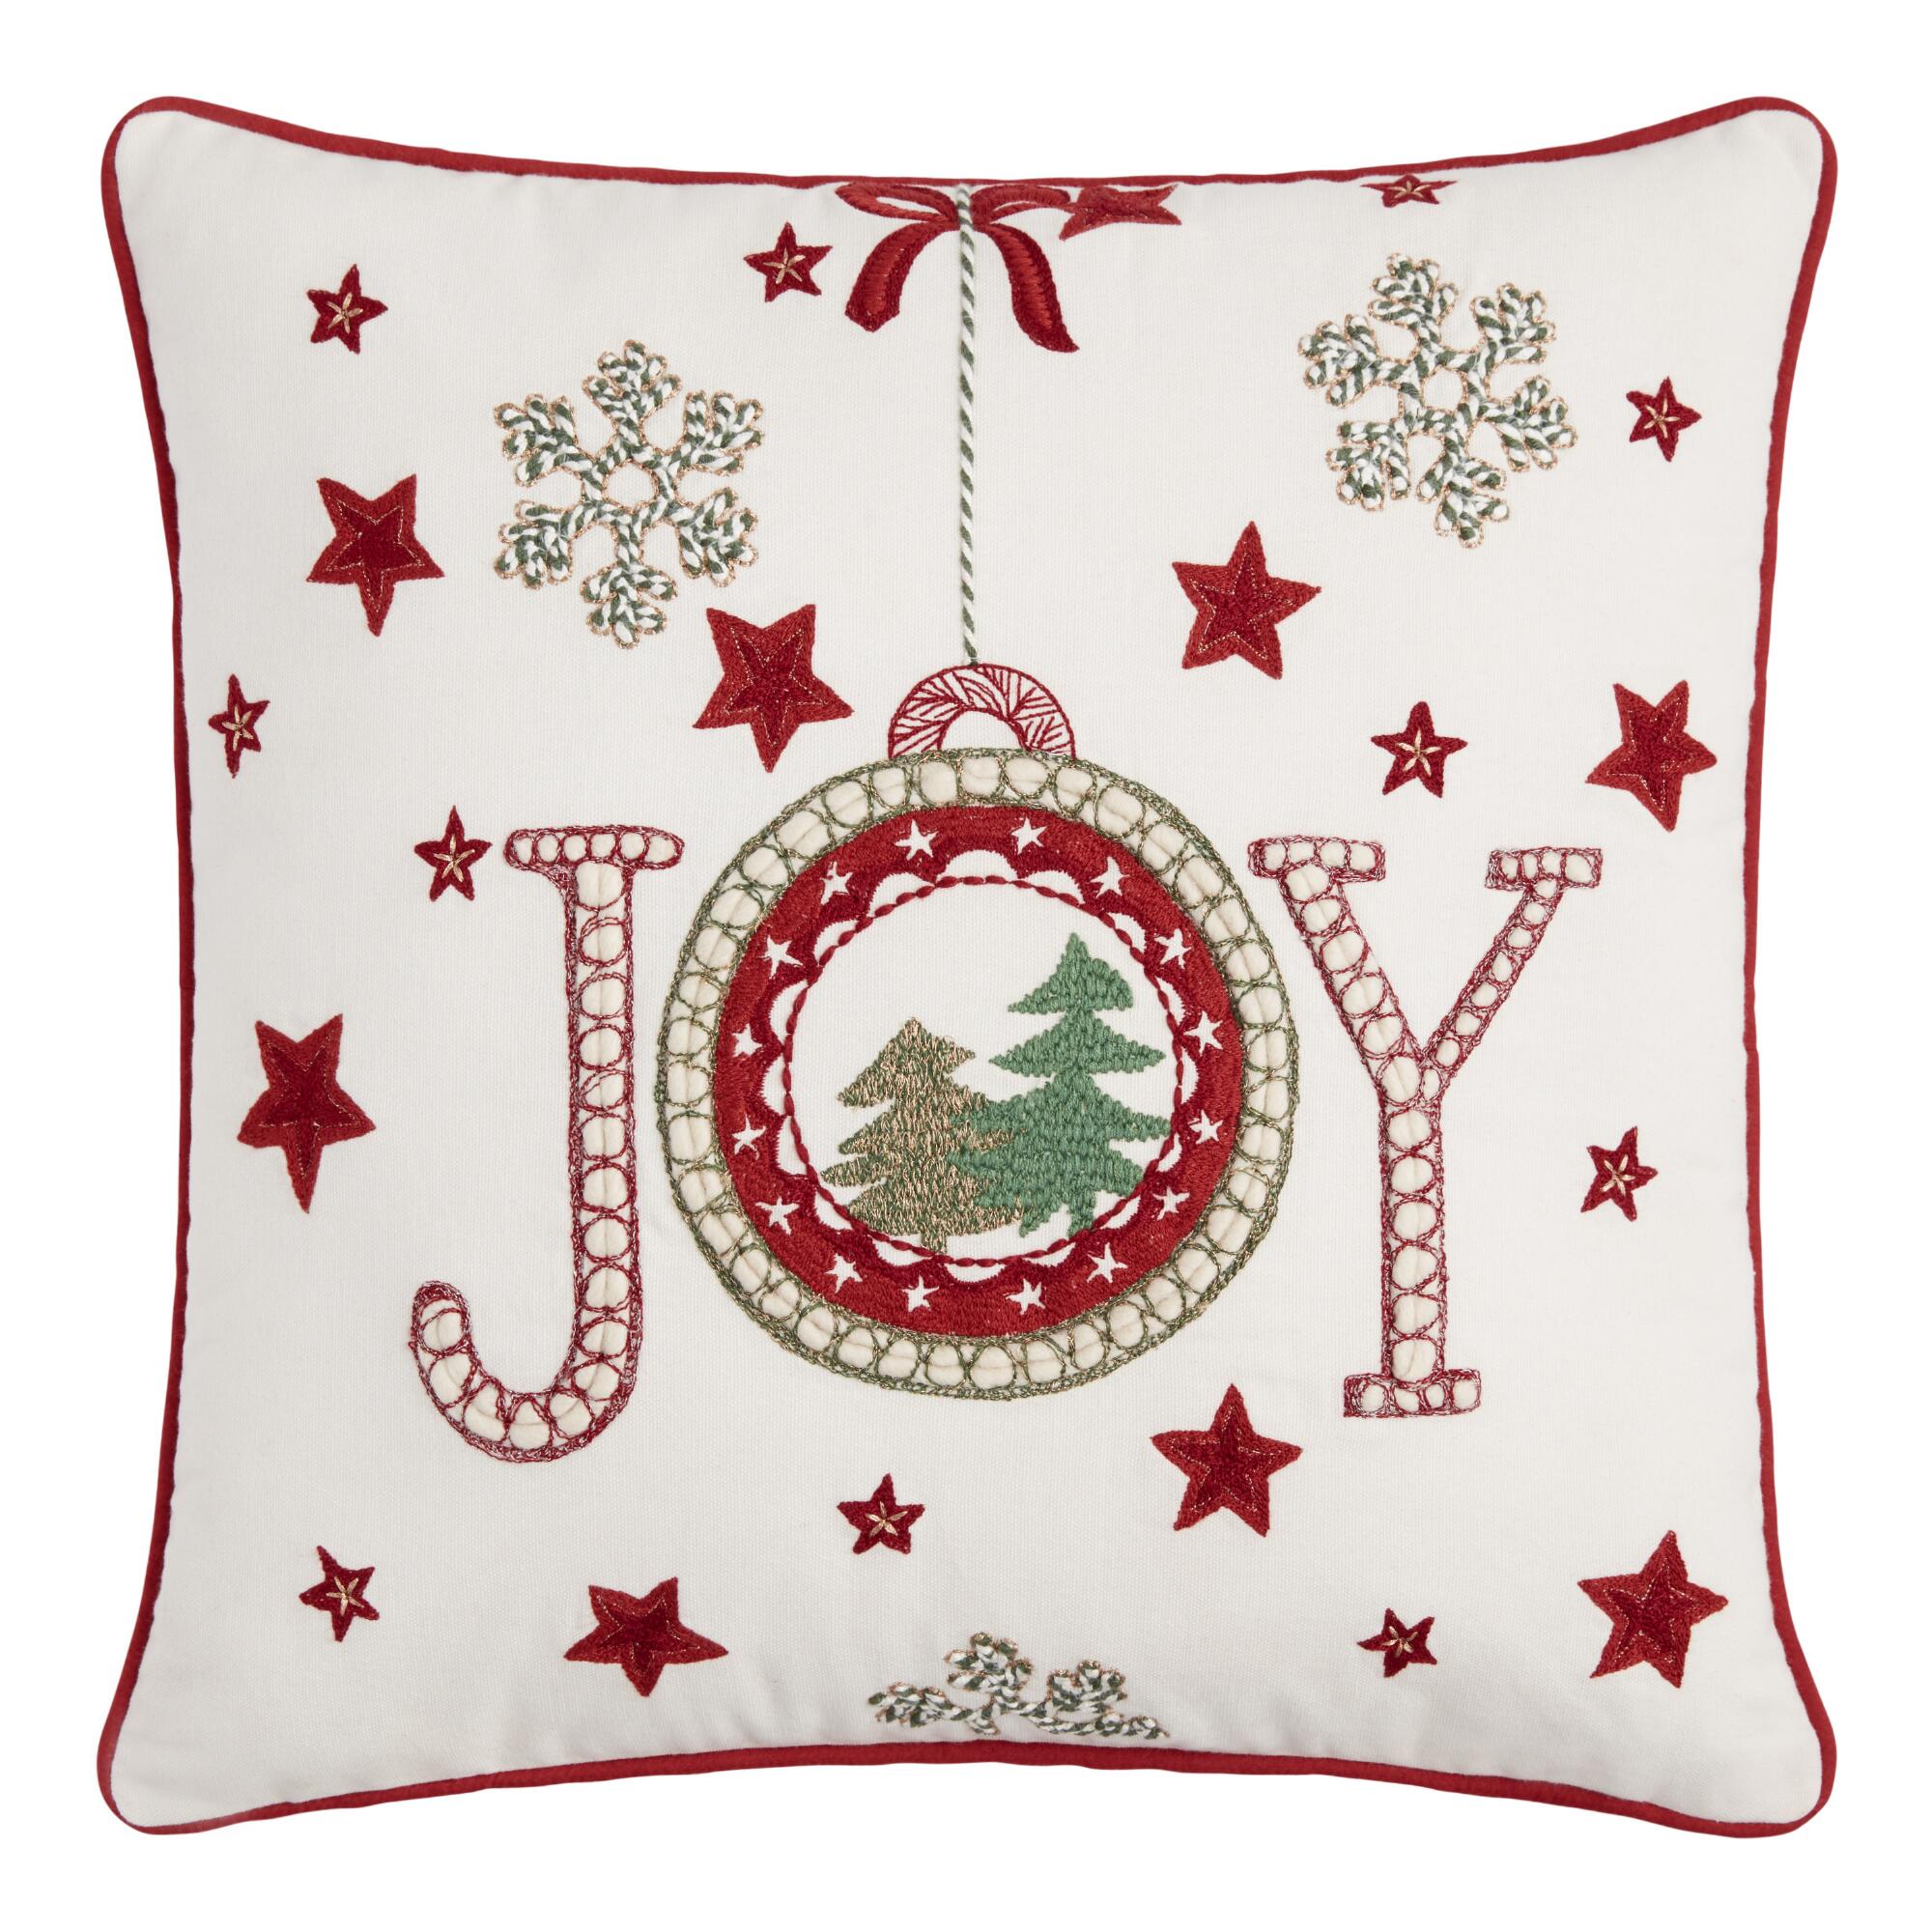 Pier Place White and Red Joy Embroidered Throw Pillow: Green/Red/White - Cotton - 18" Square by World Market